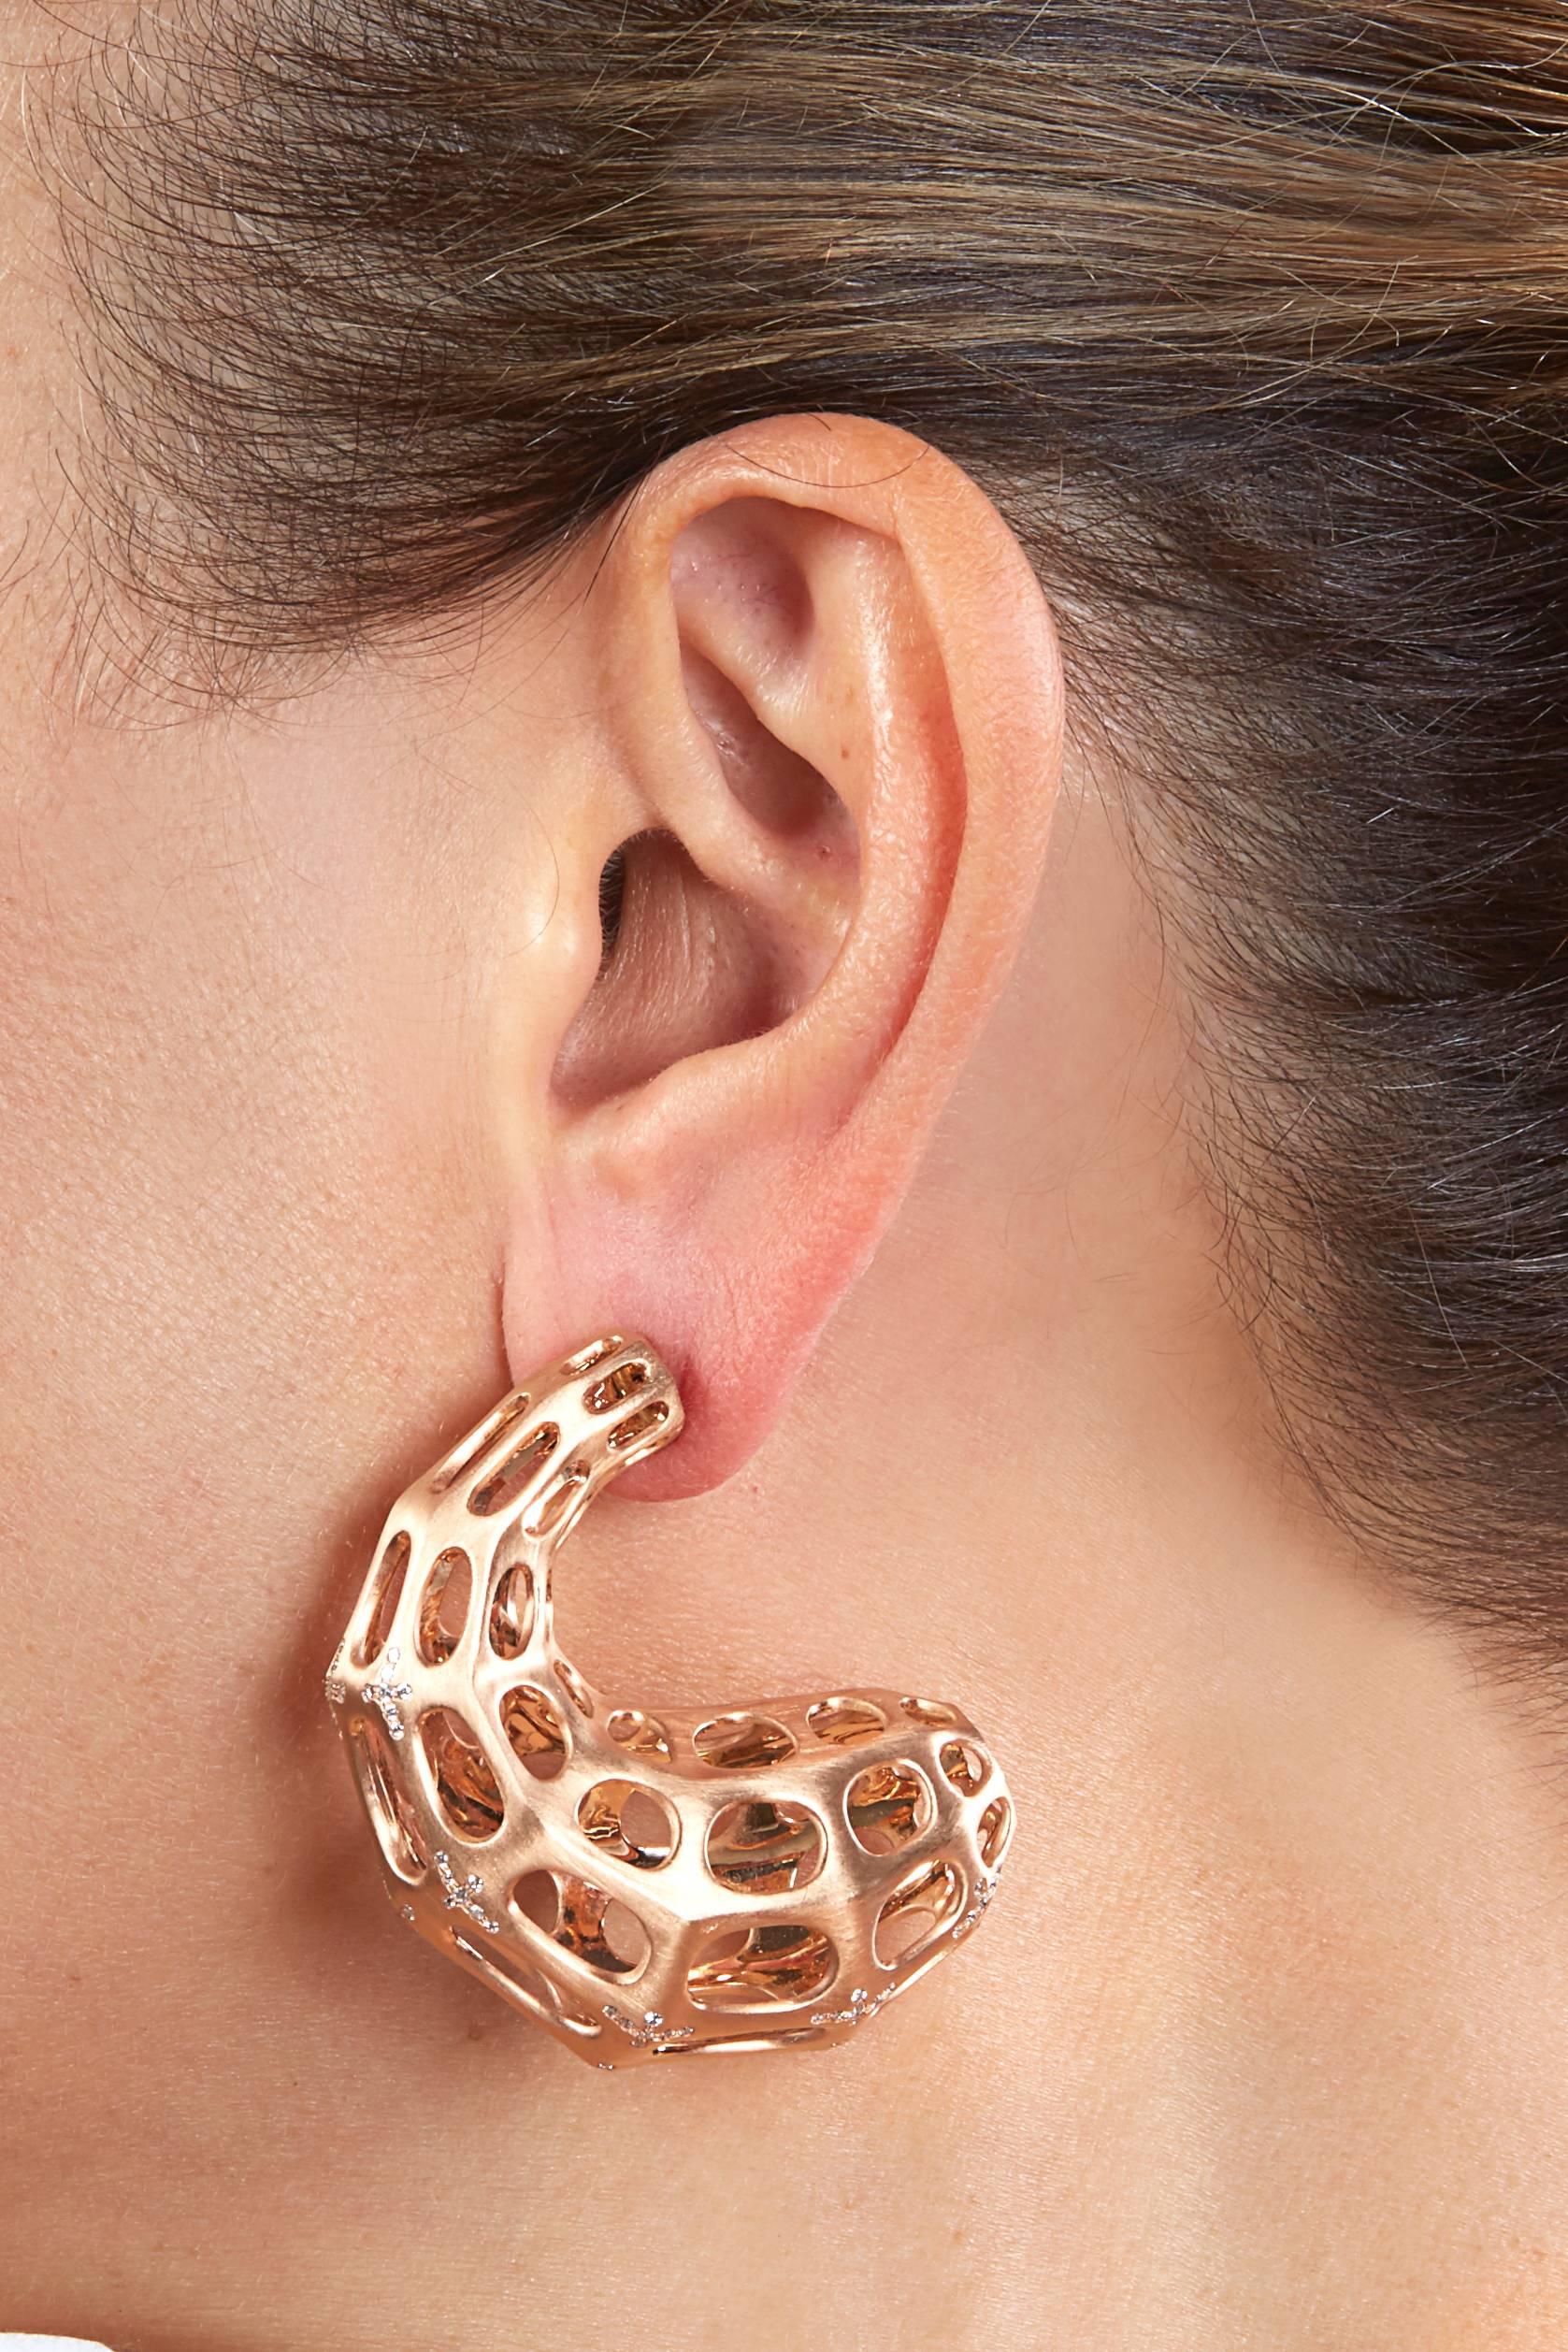 SAM.SAAB Rose Gold Contemporary Earrings with Diamond Accents In New Condition For Sale In Long Island City, NY